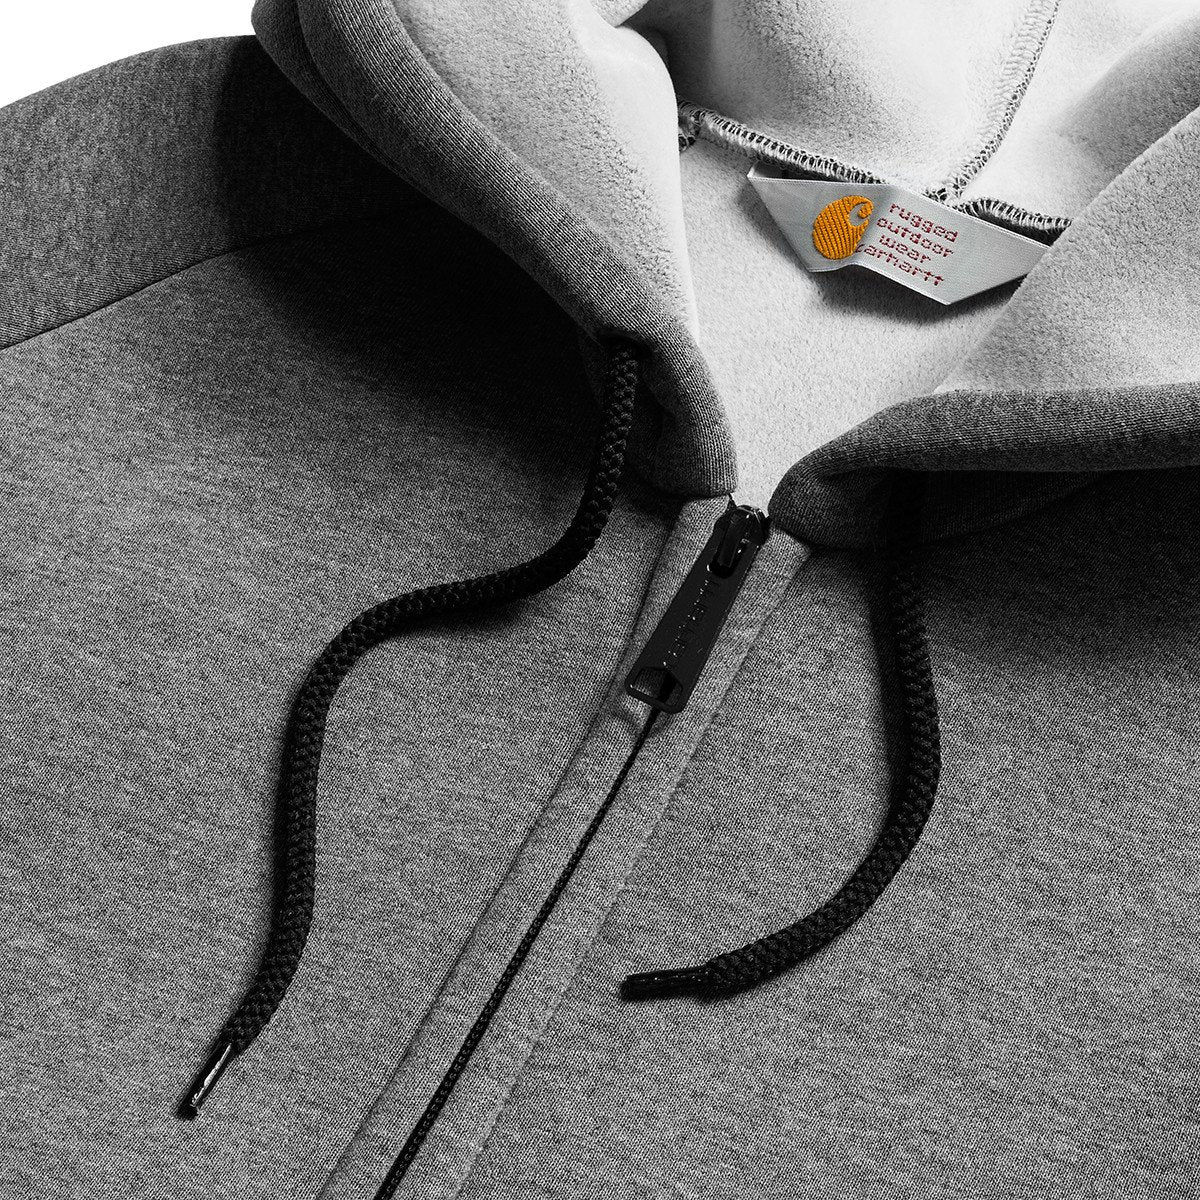 Car-Lux Hooded Jacket